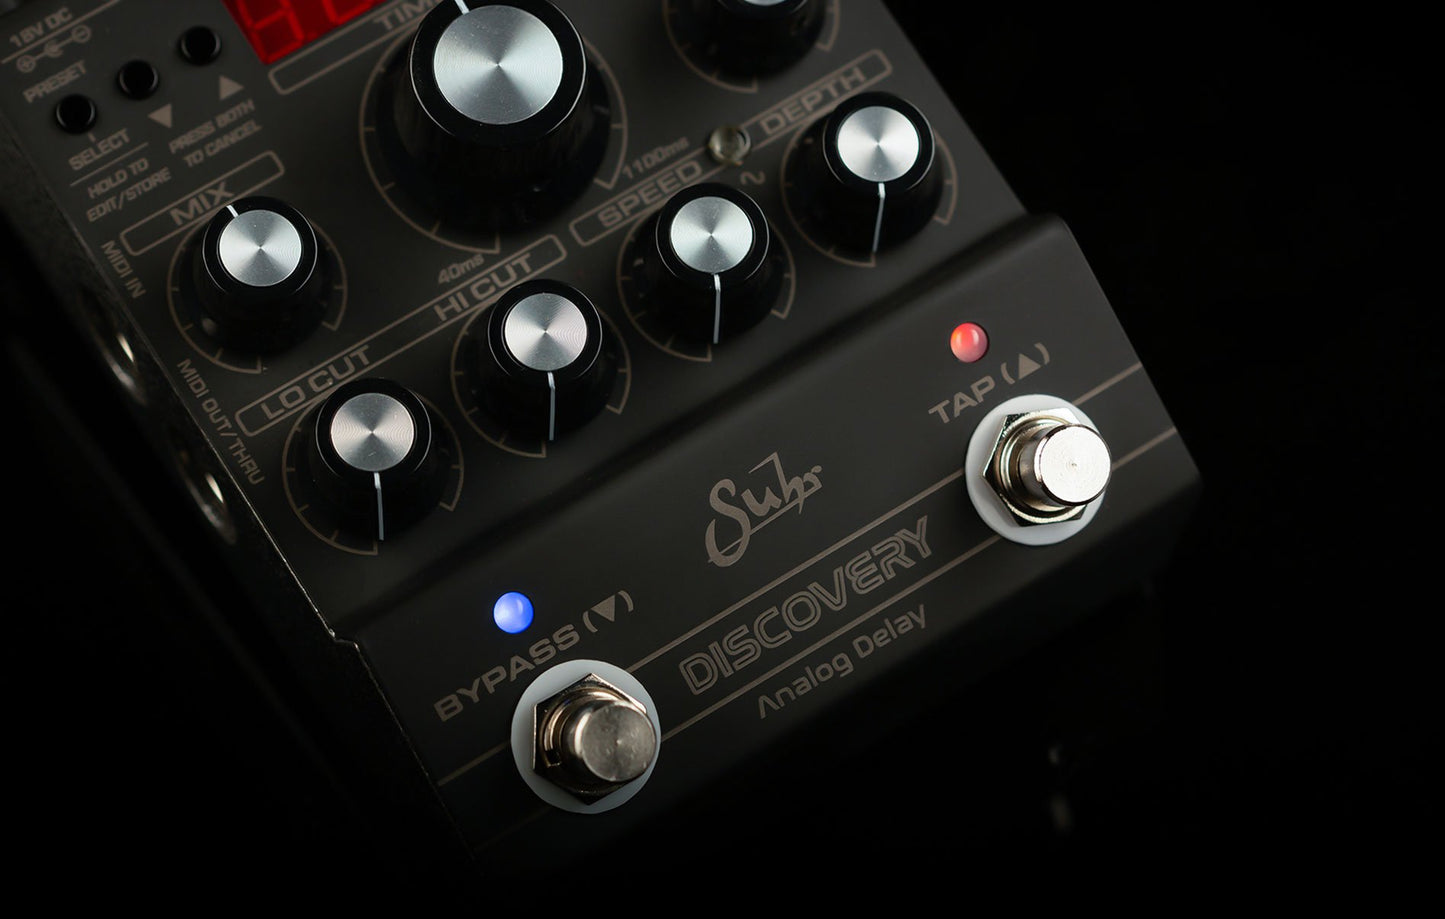 Suhr Discovery Dark Analog Delay Pedal